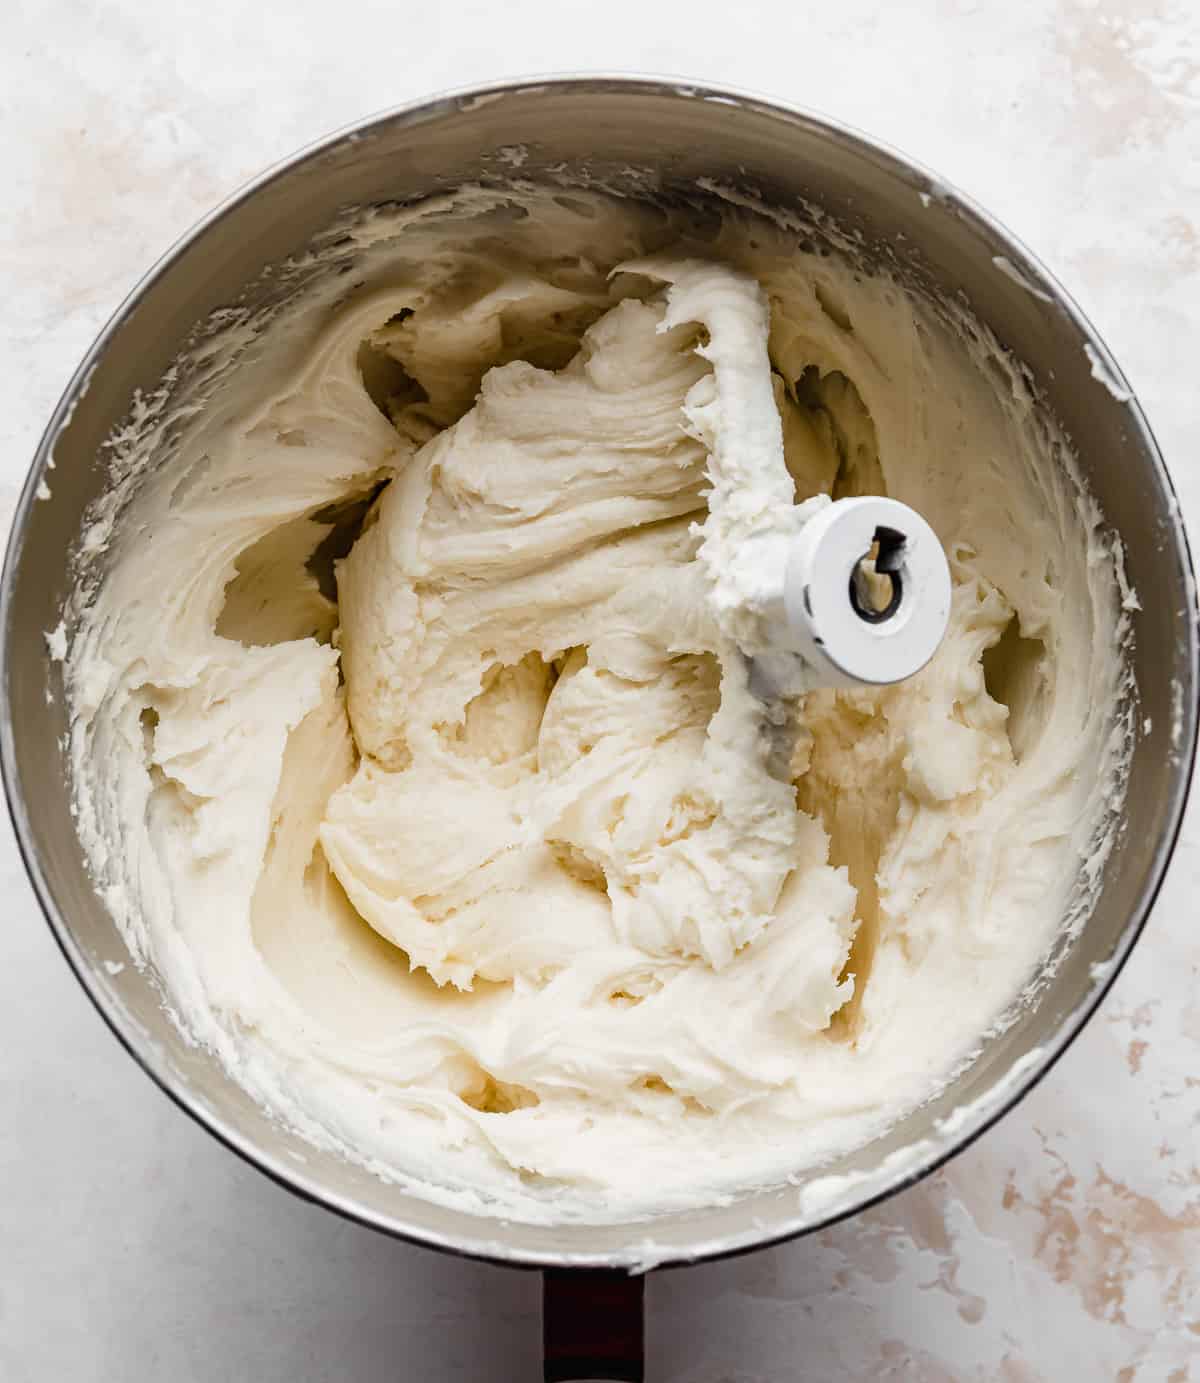 A metal bowl filled with white cream cheese frosting against a white background.